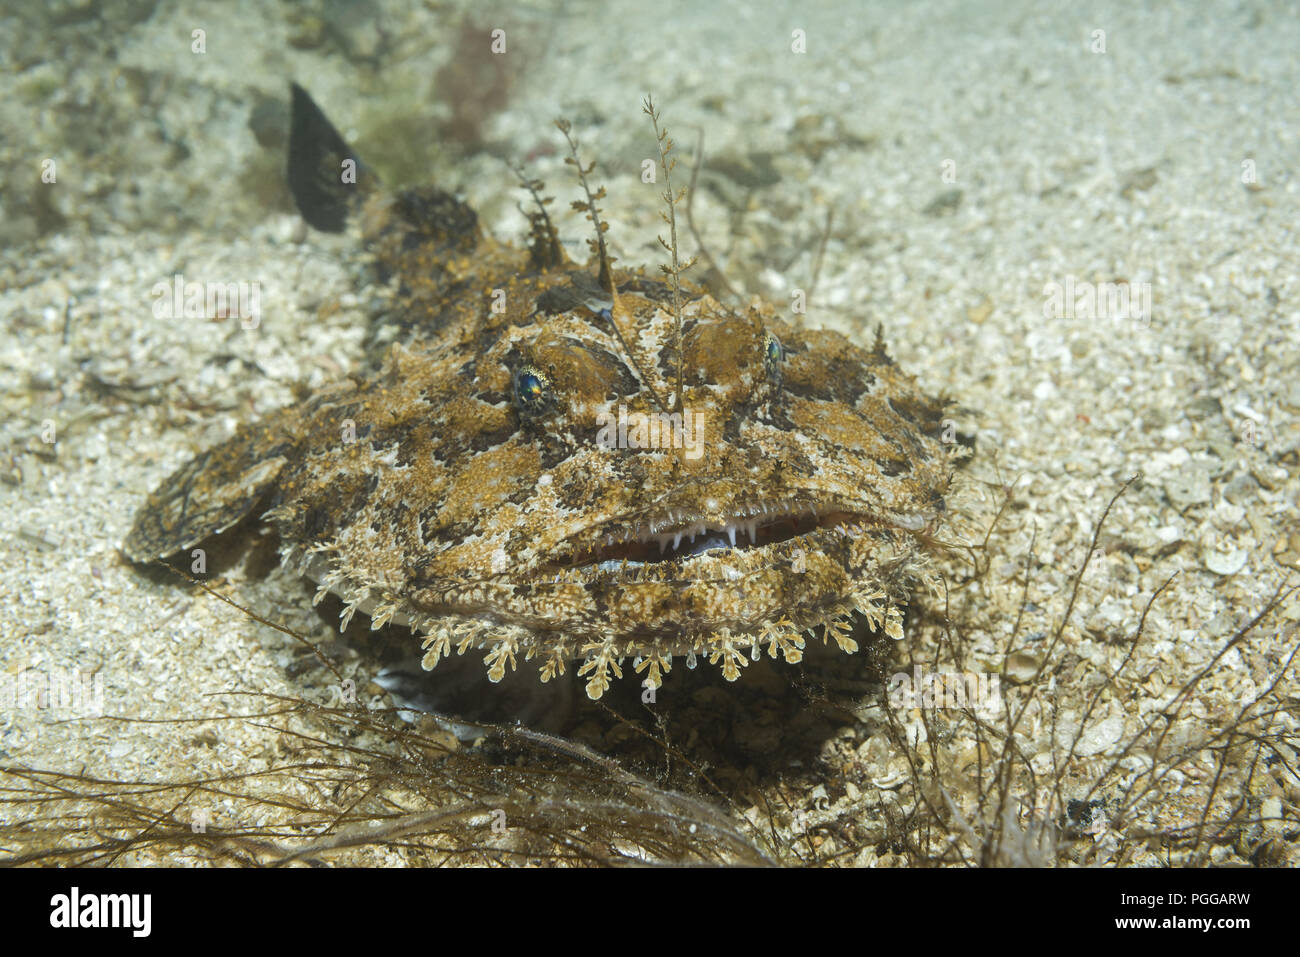 Monkfish or Angler fish (Lophius piscatorius) lies on the sand Stock Photo